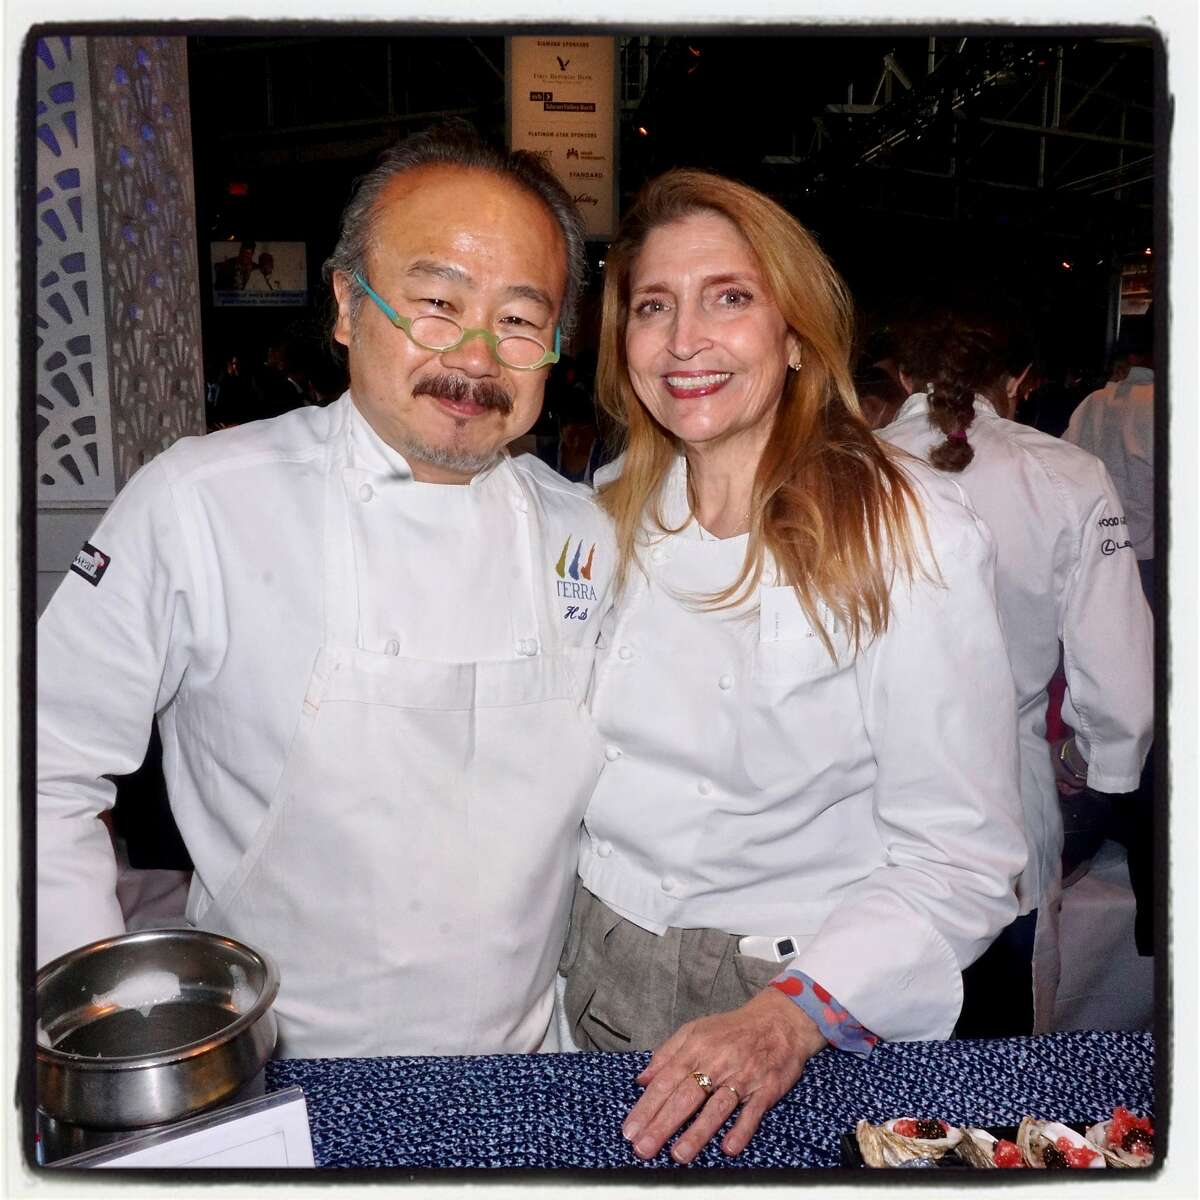 Terra chef-owners Hire Sone and his wife, Lissa Doumani, at the Star Chefs & Vintners Gala. May 20, 2018.